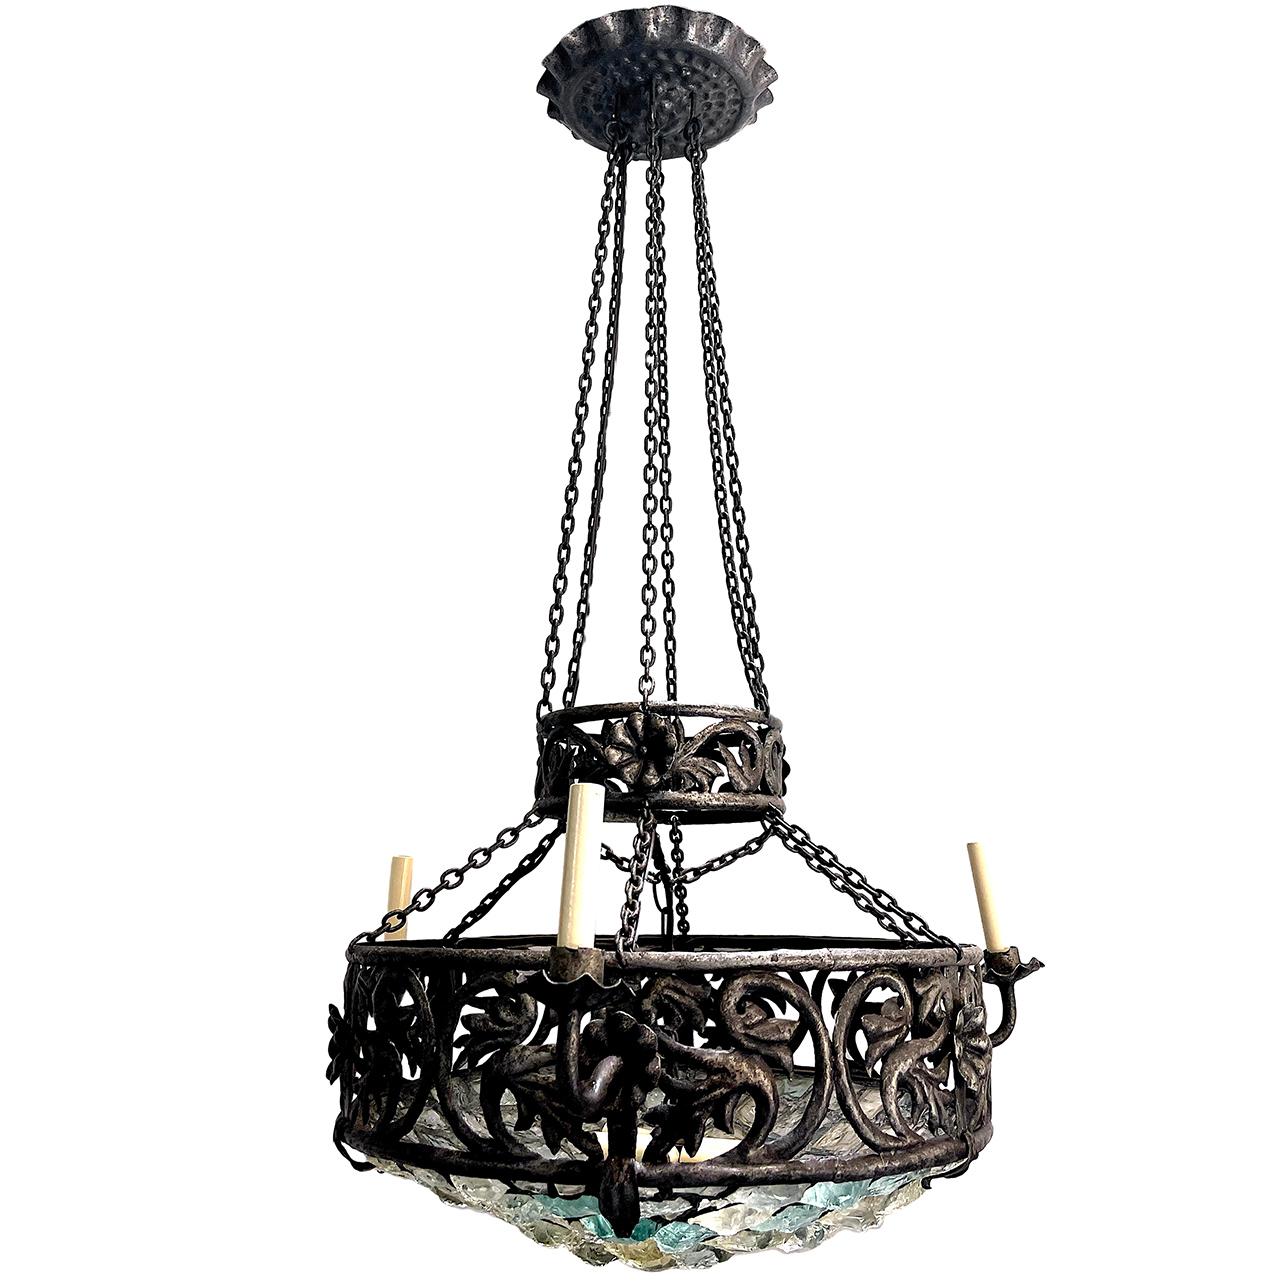 A circa 1920's Italian wrought iron three-arm chandelier with six interior lights and clear and blue art glass inset.

Measurements:
Diameter: 31